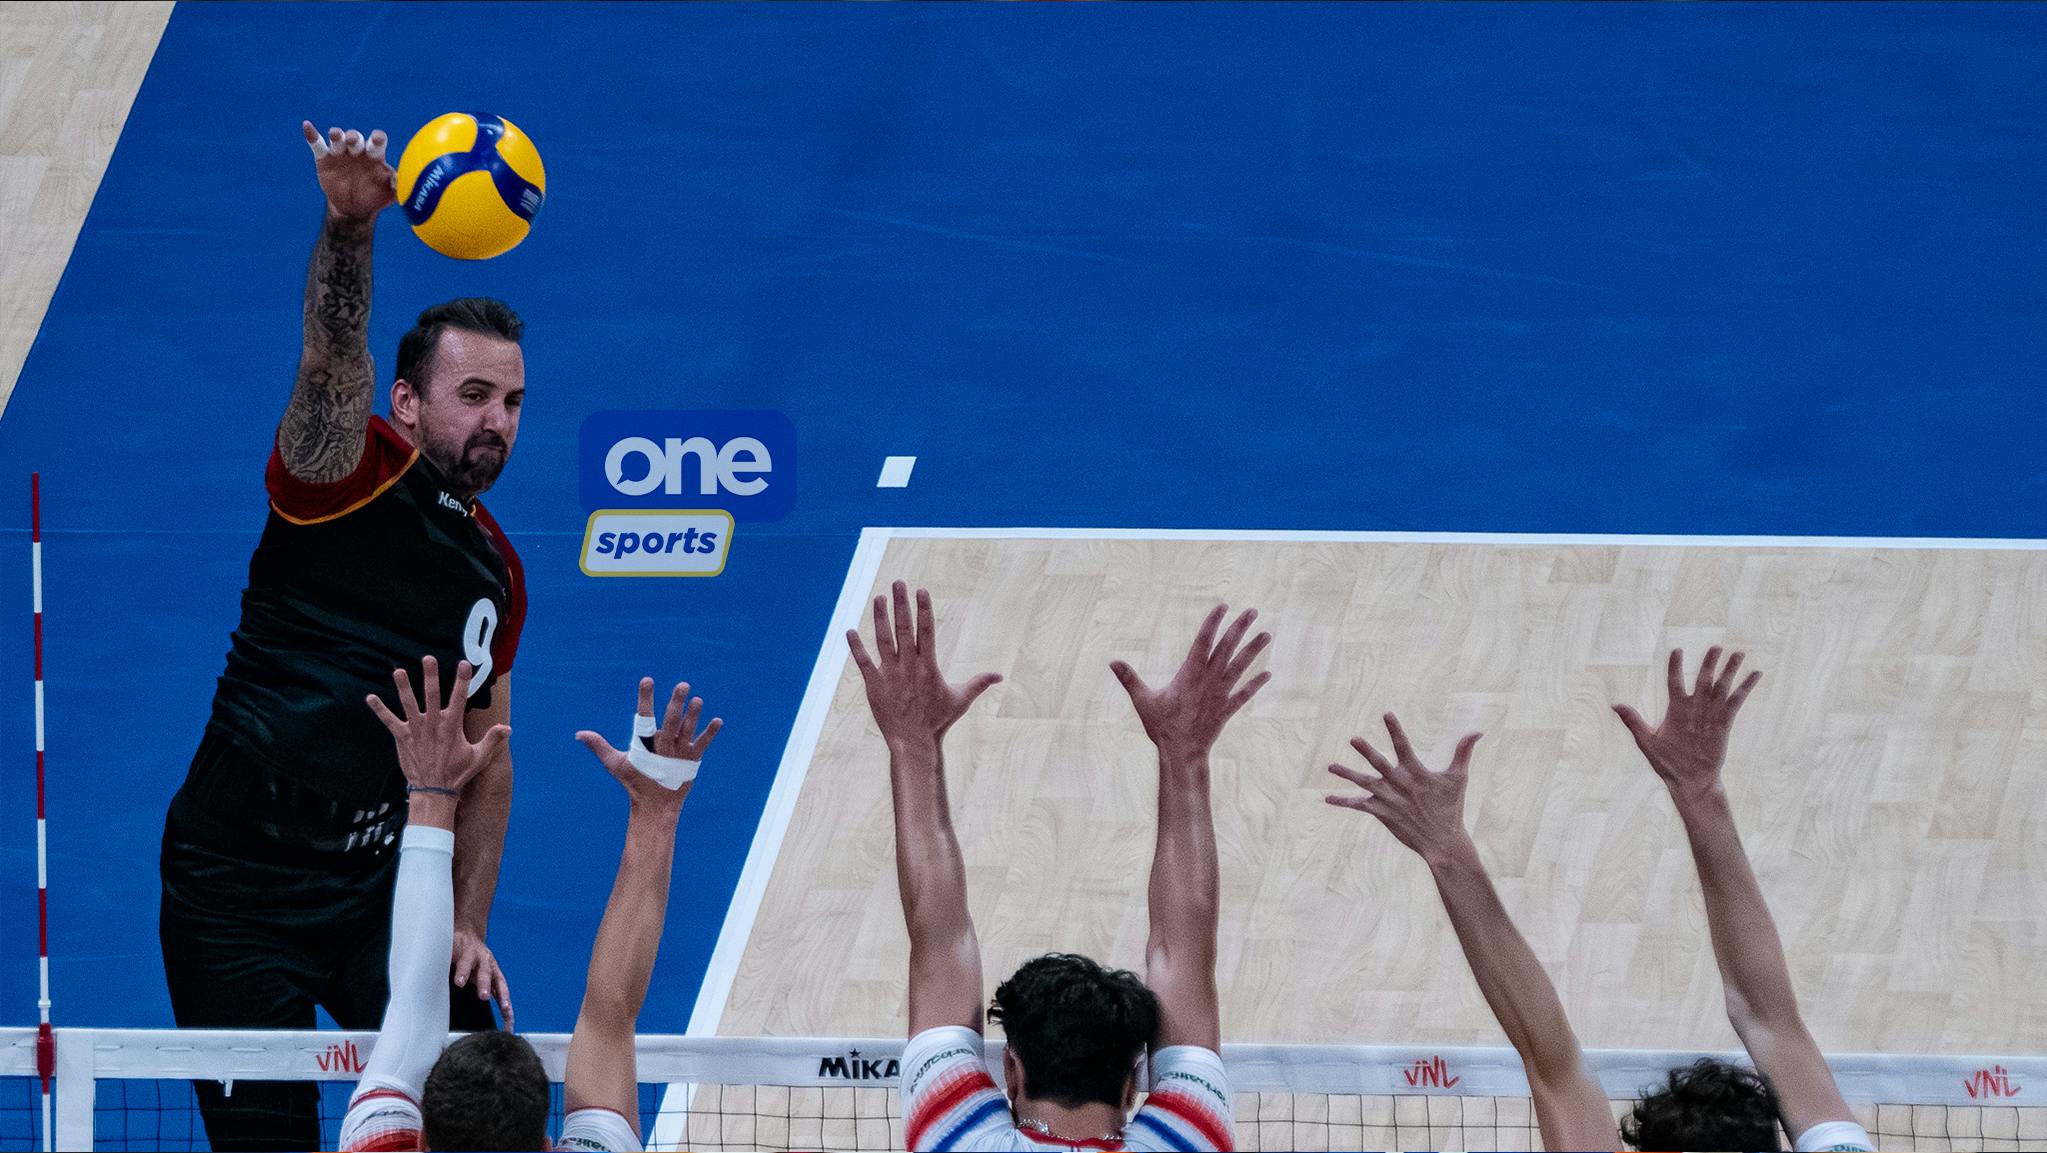 VNL: Veteran György Grozer relishes first time in Manila as he leads Germany’s crucial win over France